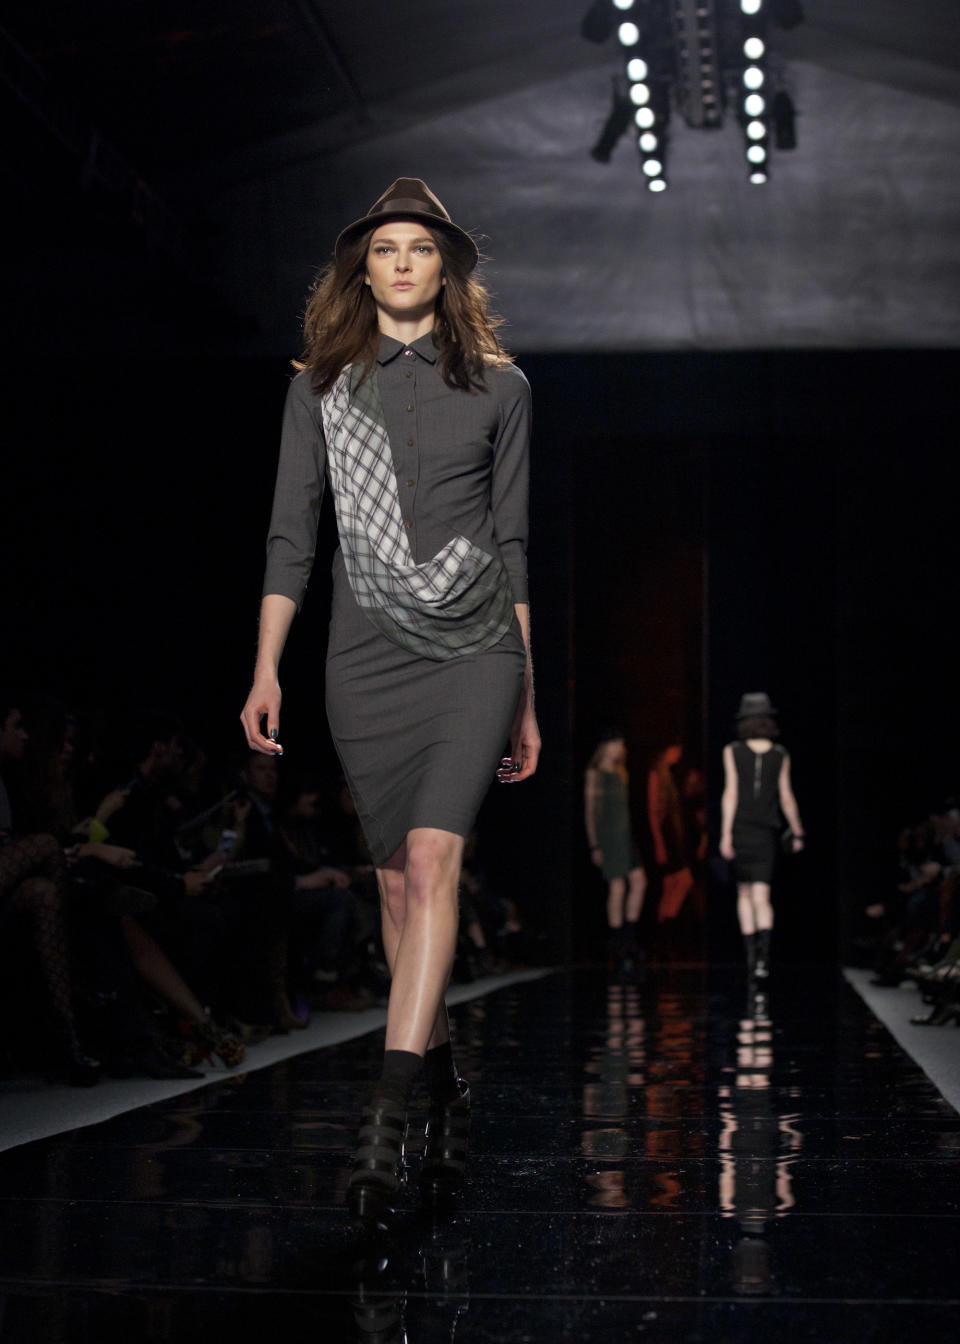 A model walks the runway during the Nicole Miller Fall 2013 fashion show during Fashion Week, Friday, Feb. 8, 2013, in New York. (AP Photo/Karly Domb Sadof)